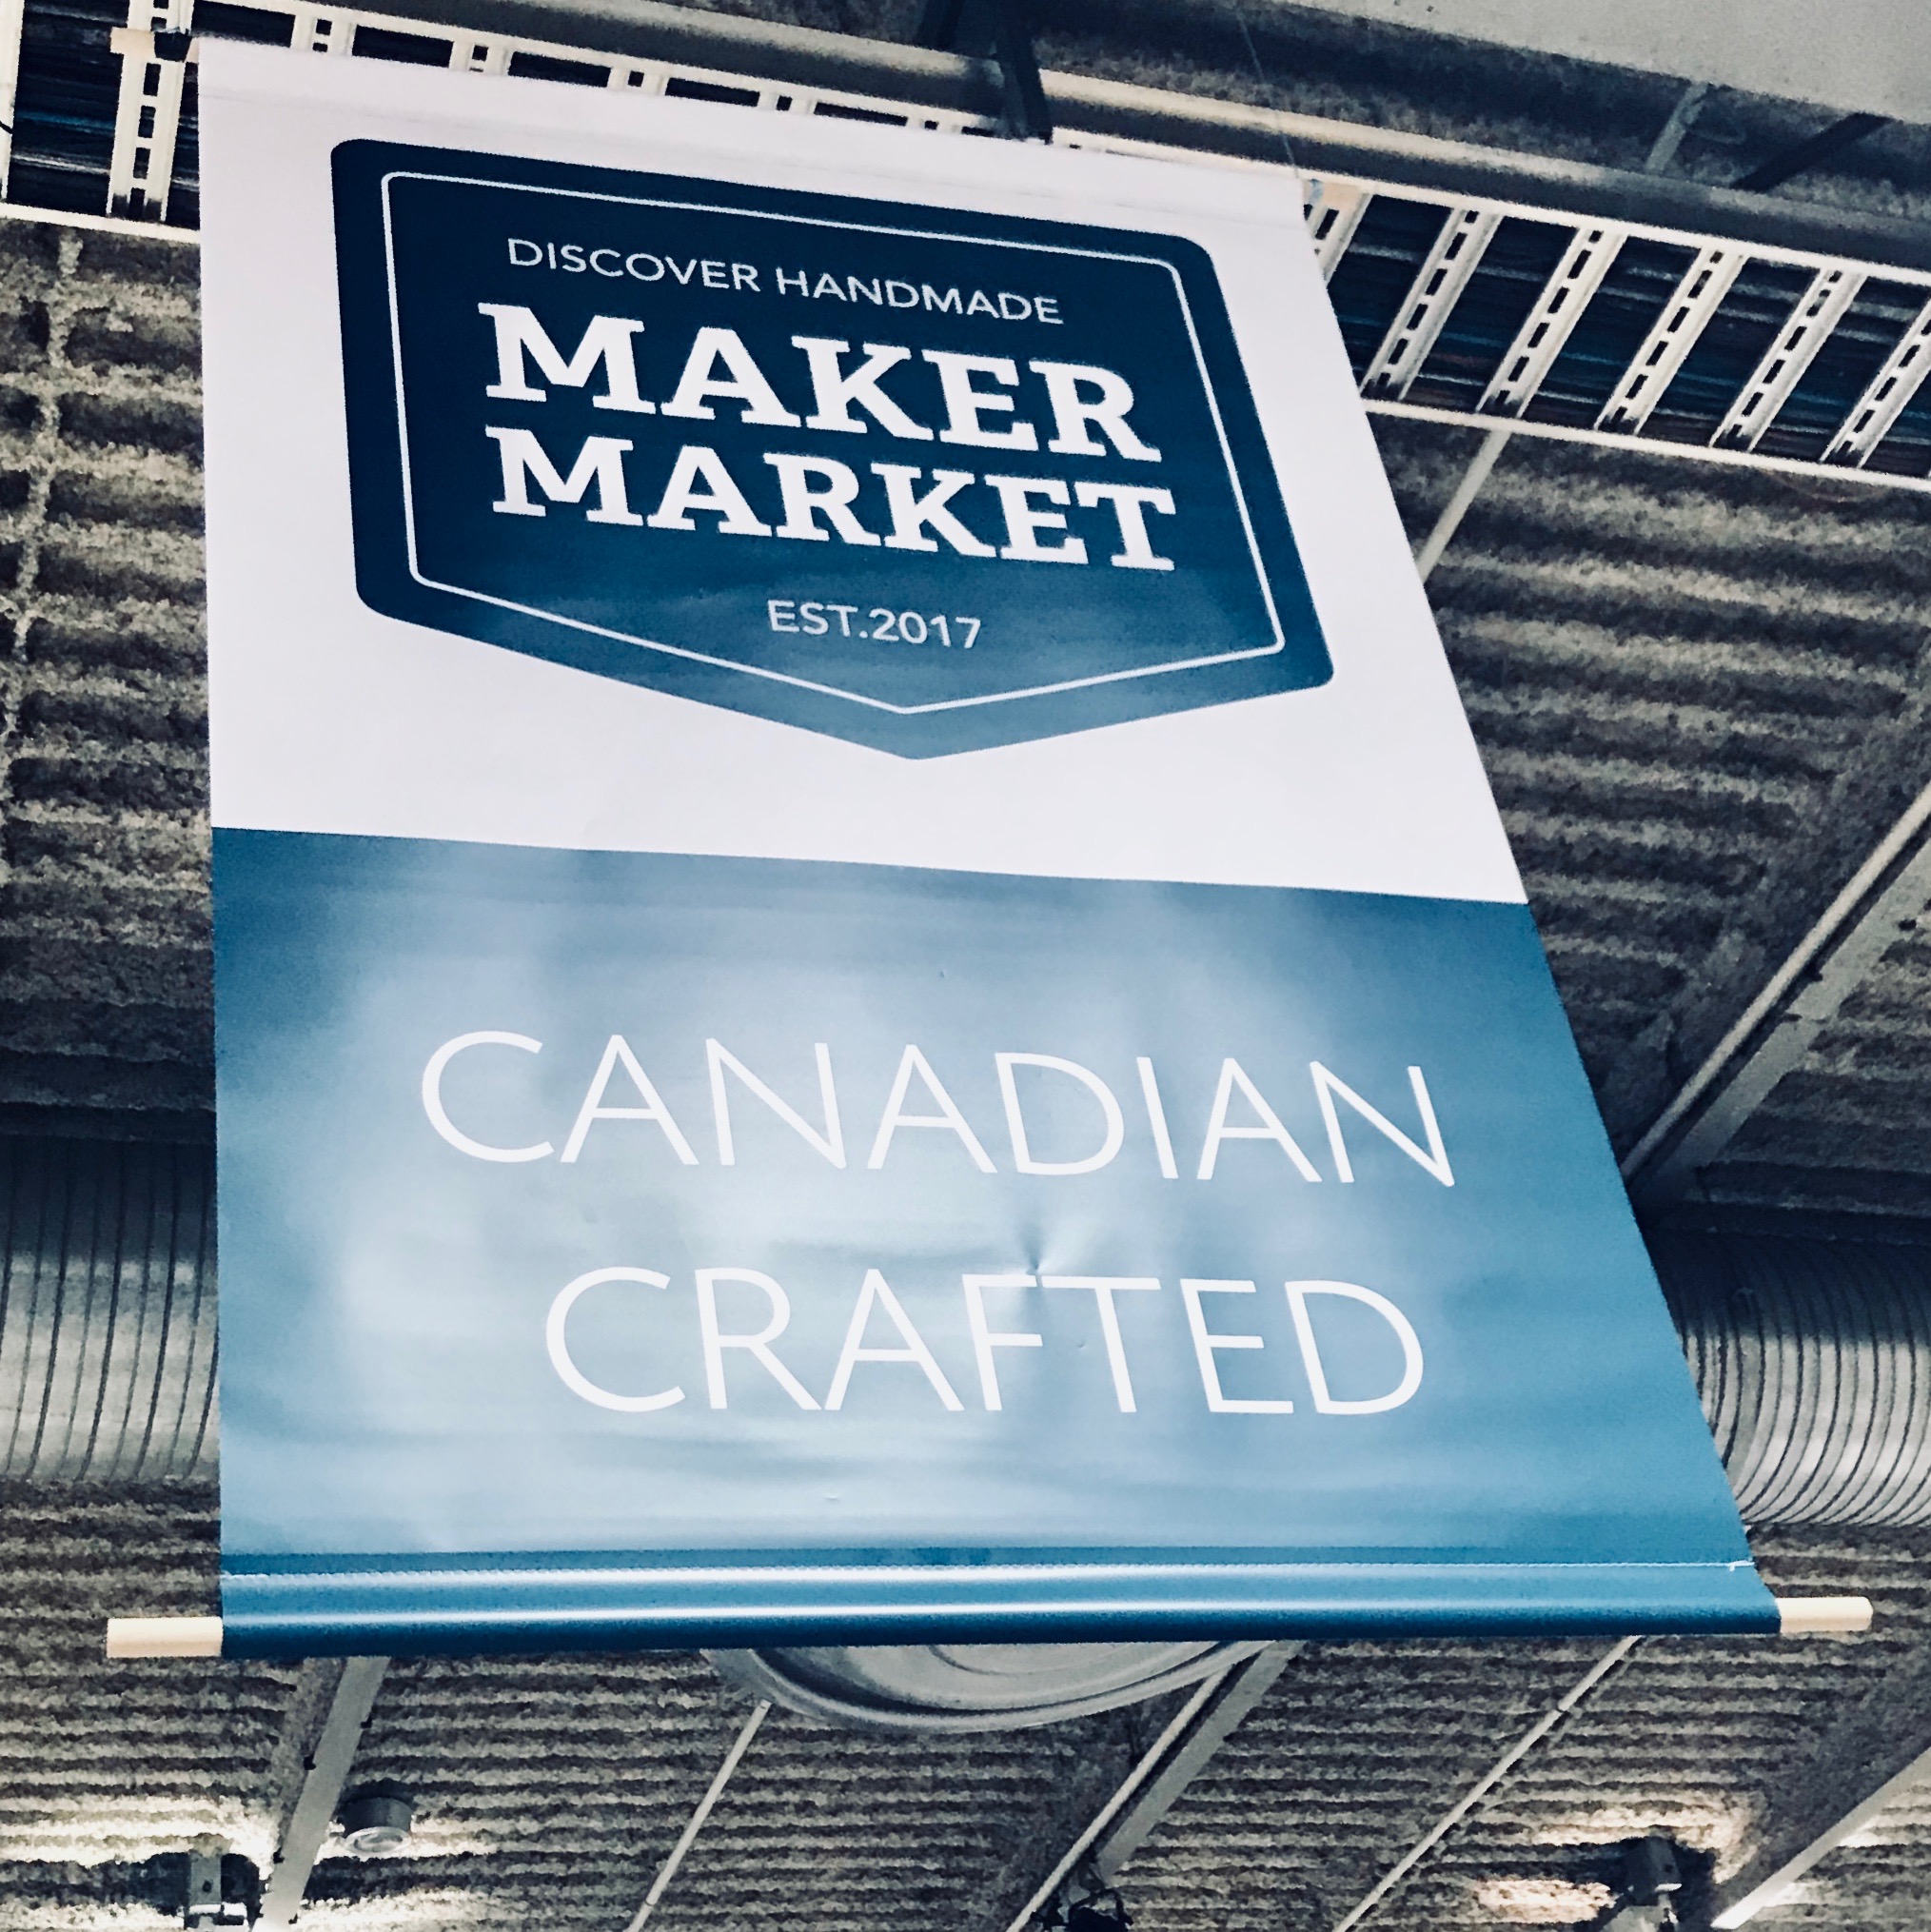 The banner for the Maker Market hangs in the BMO Centre